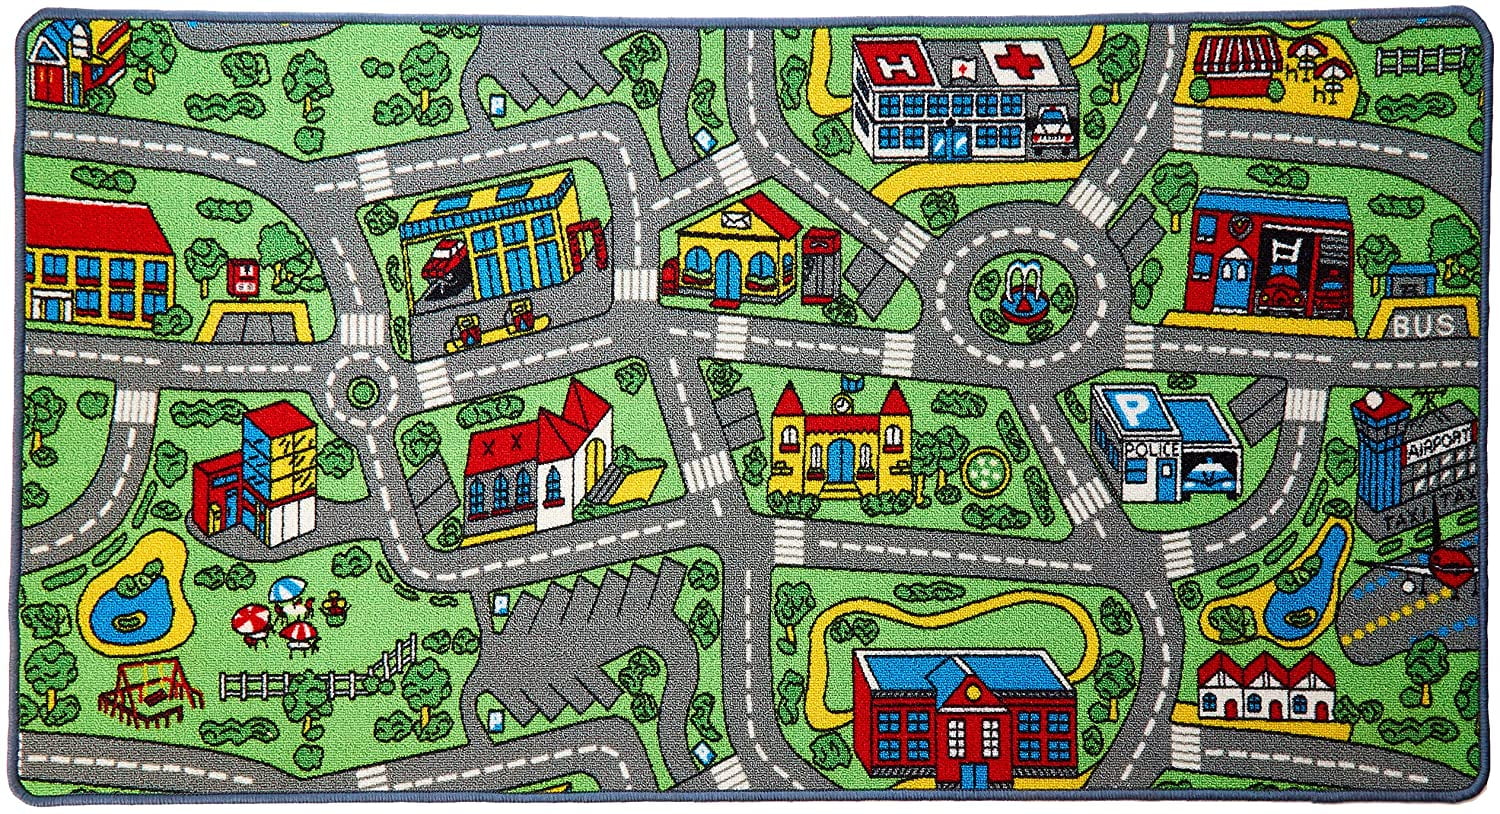 Click N' Play City Life Kids Road Traffic Play mat Rug Extra Large Non-Slip Carpet Fun Educational for Play Area Playroom Bedroom-Extra Large 79” x 40”